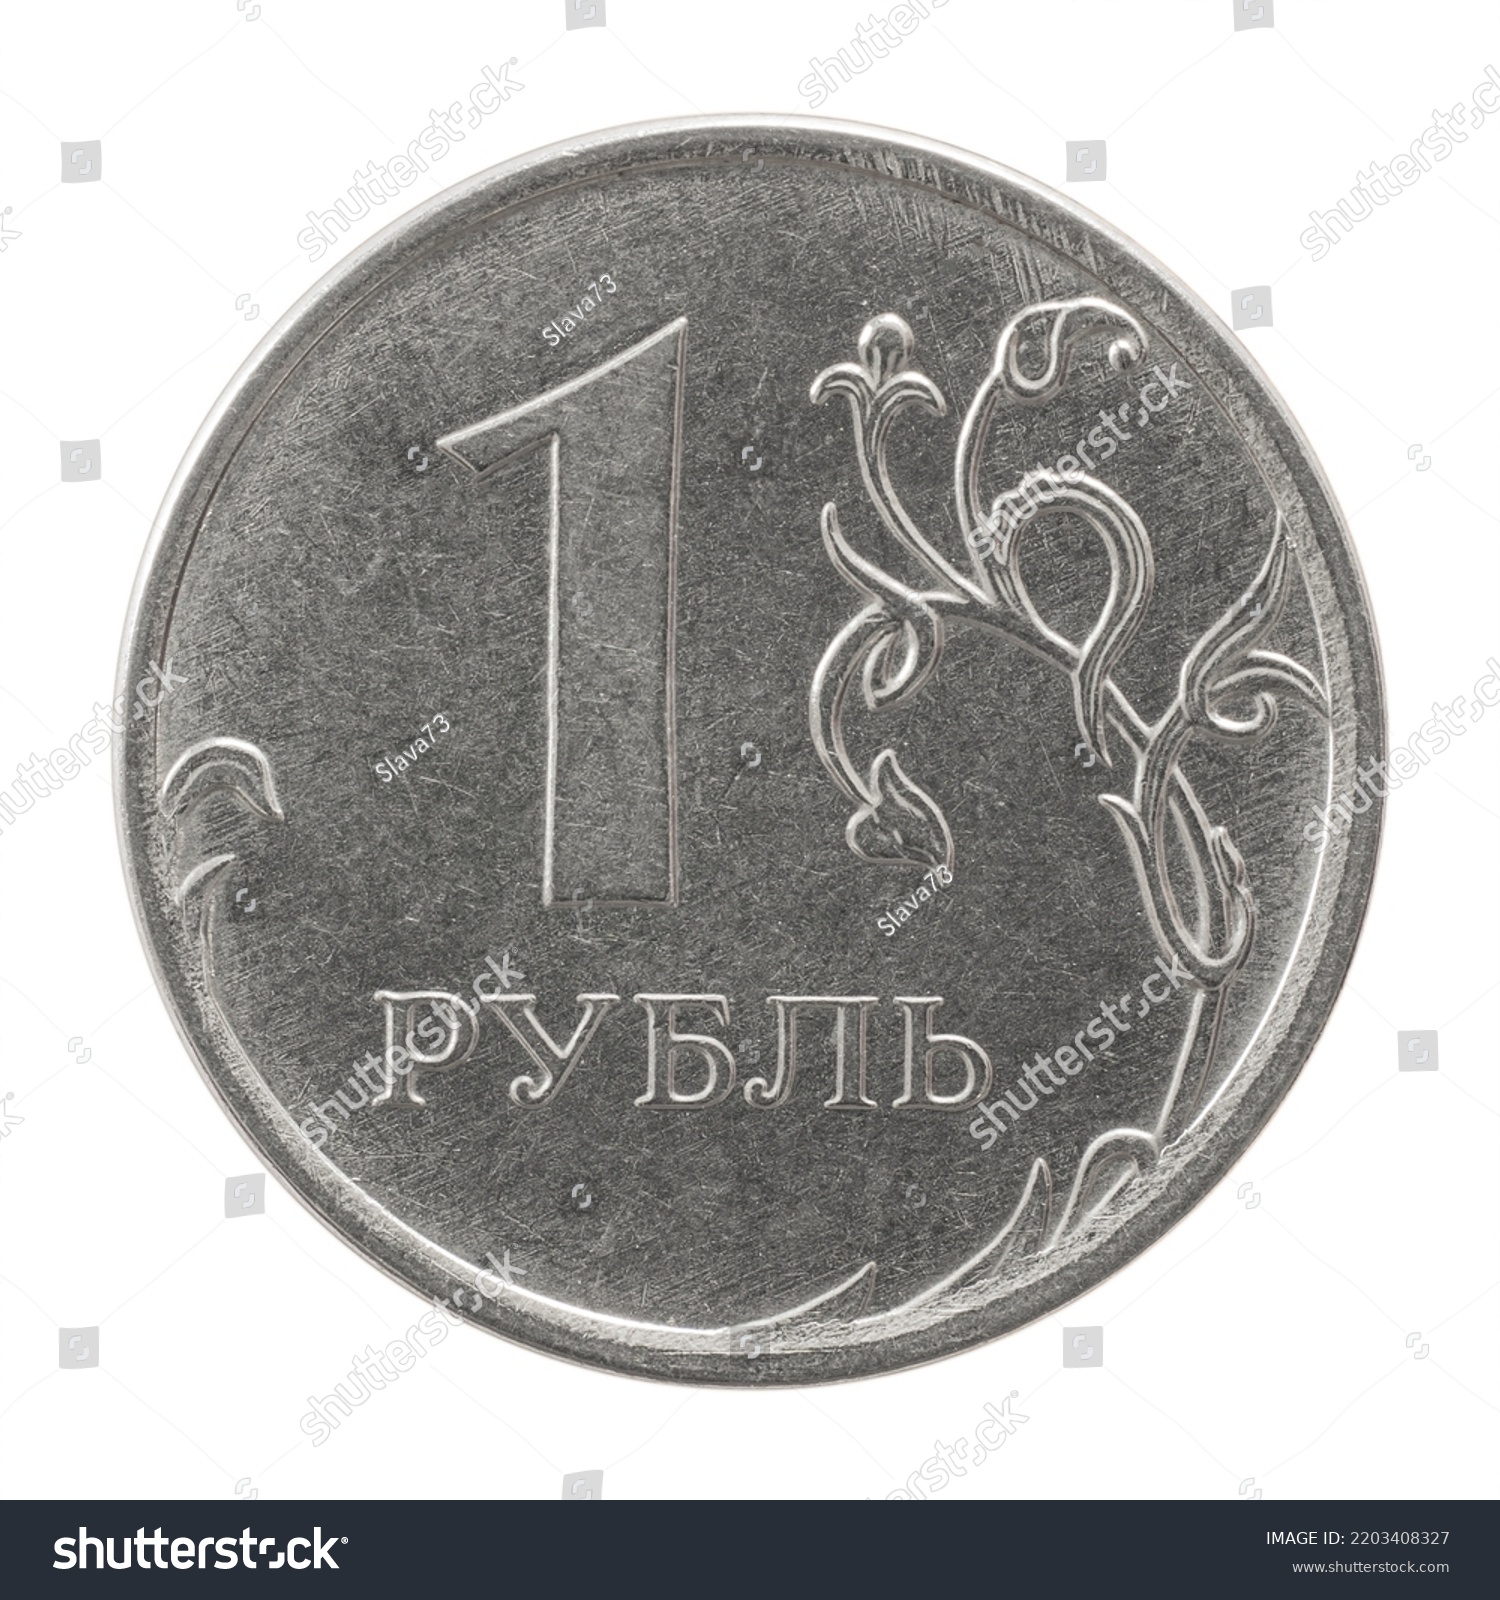 The current coin of Russia 1 one ruble 2018 rarity collection for numismatists top view isolated on a white background close-up #2203408327